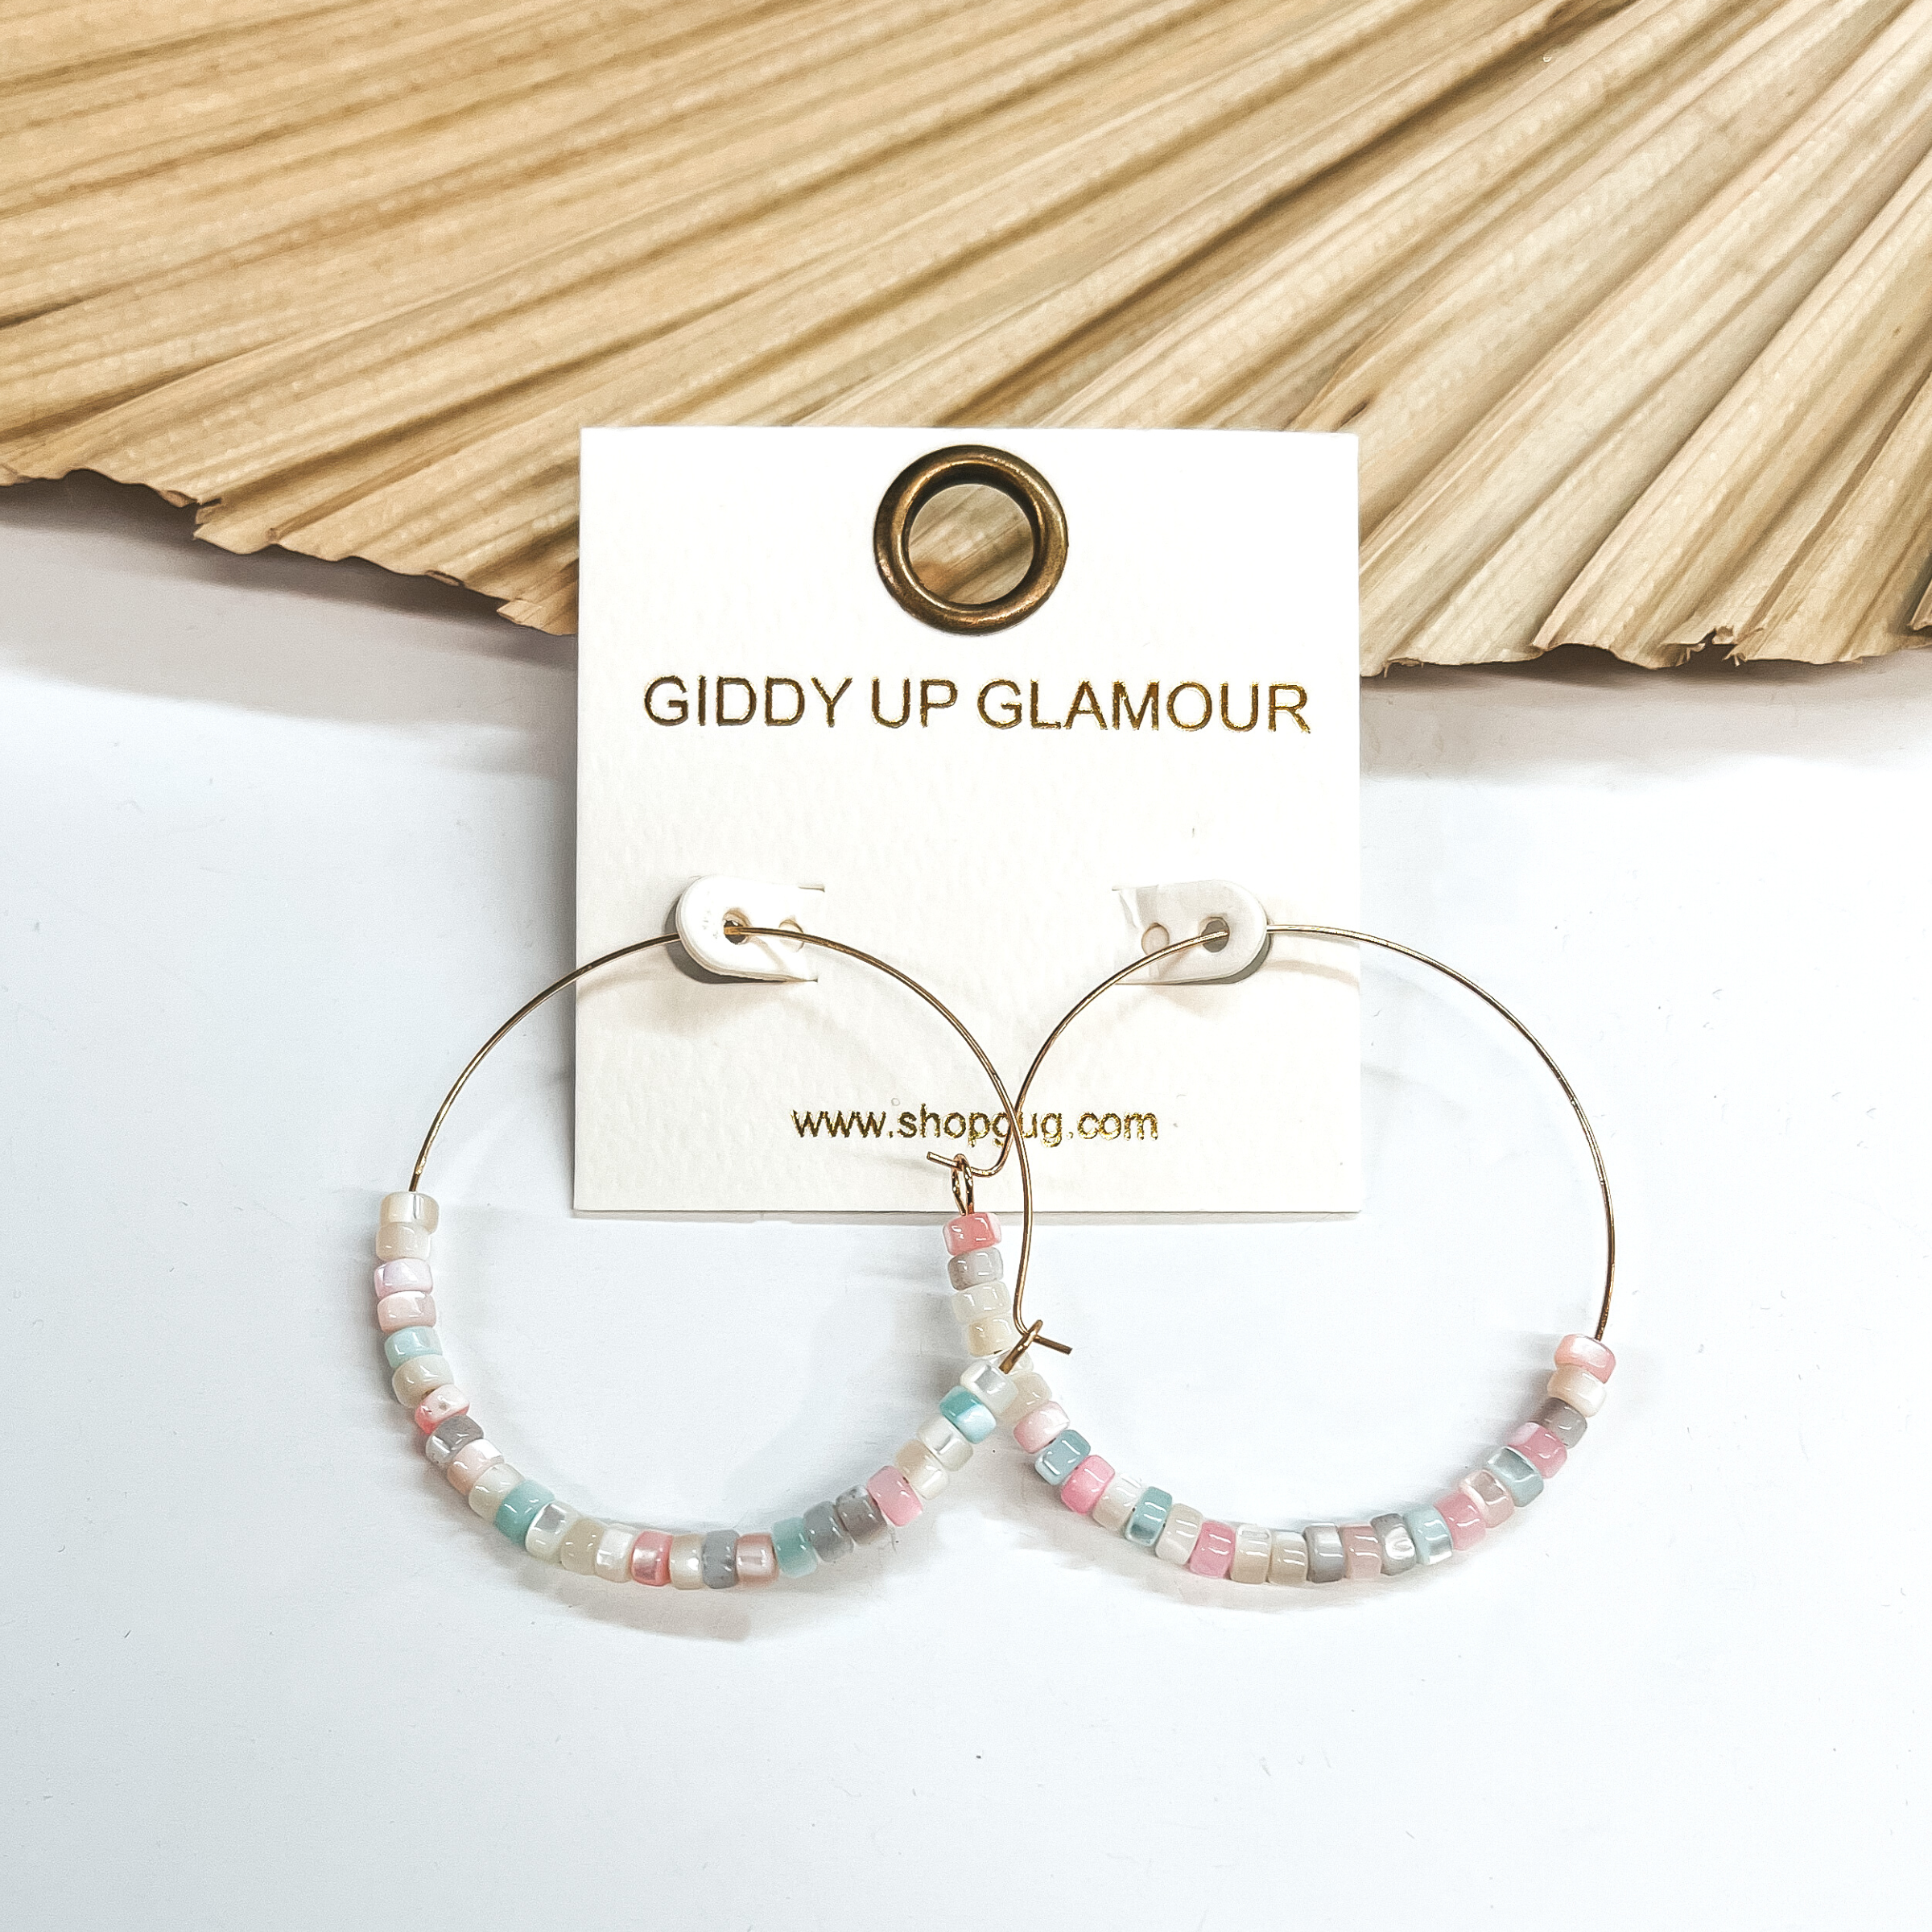 These are thin wire gold hoops with mother of pearl  beads in multicolor; ivory, light blue, light pink,  pink, and gray. The beads are in the bottom half of  the  earrings. These earrings are taken leaning up  against a dried up palm leaf and white background.